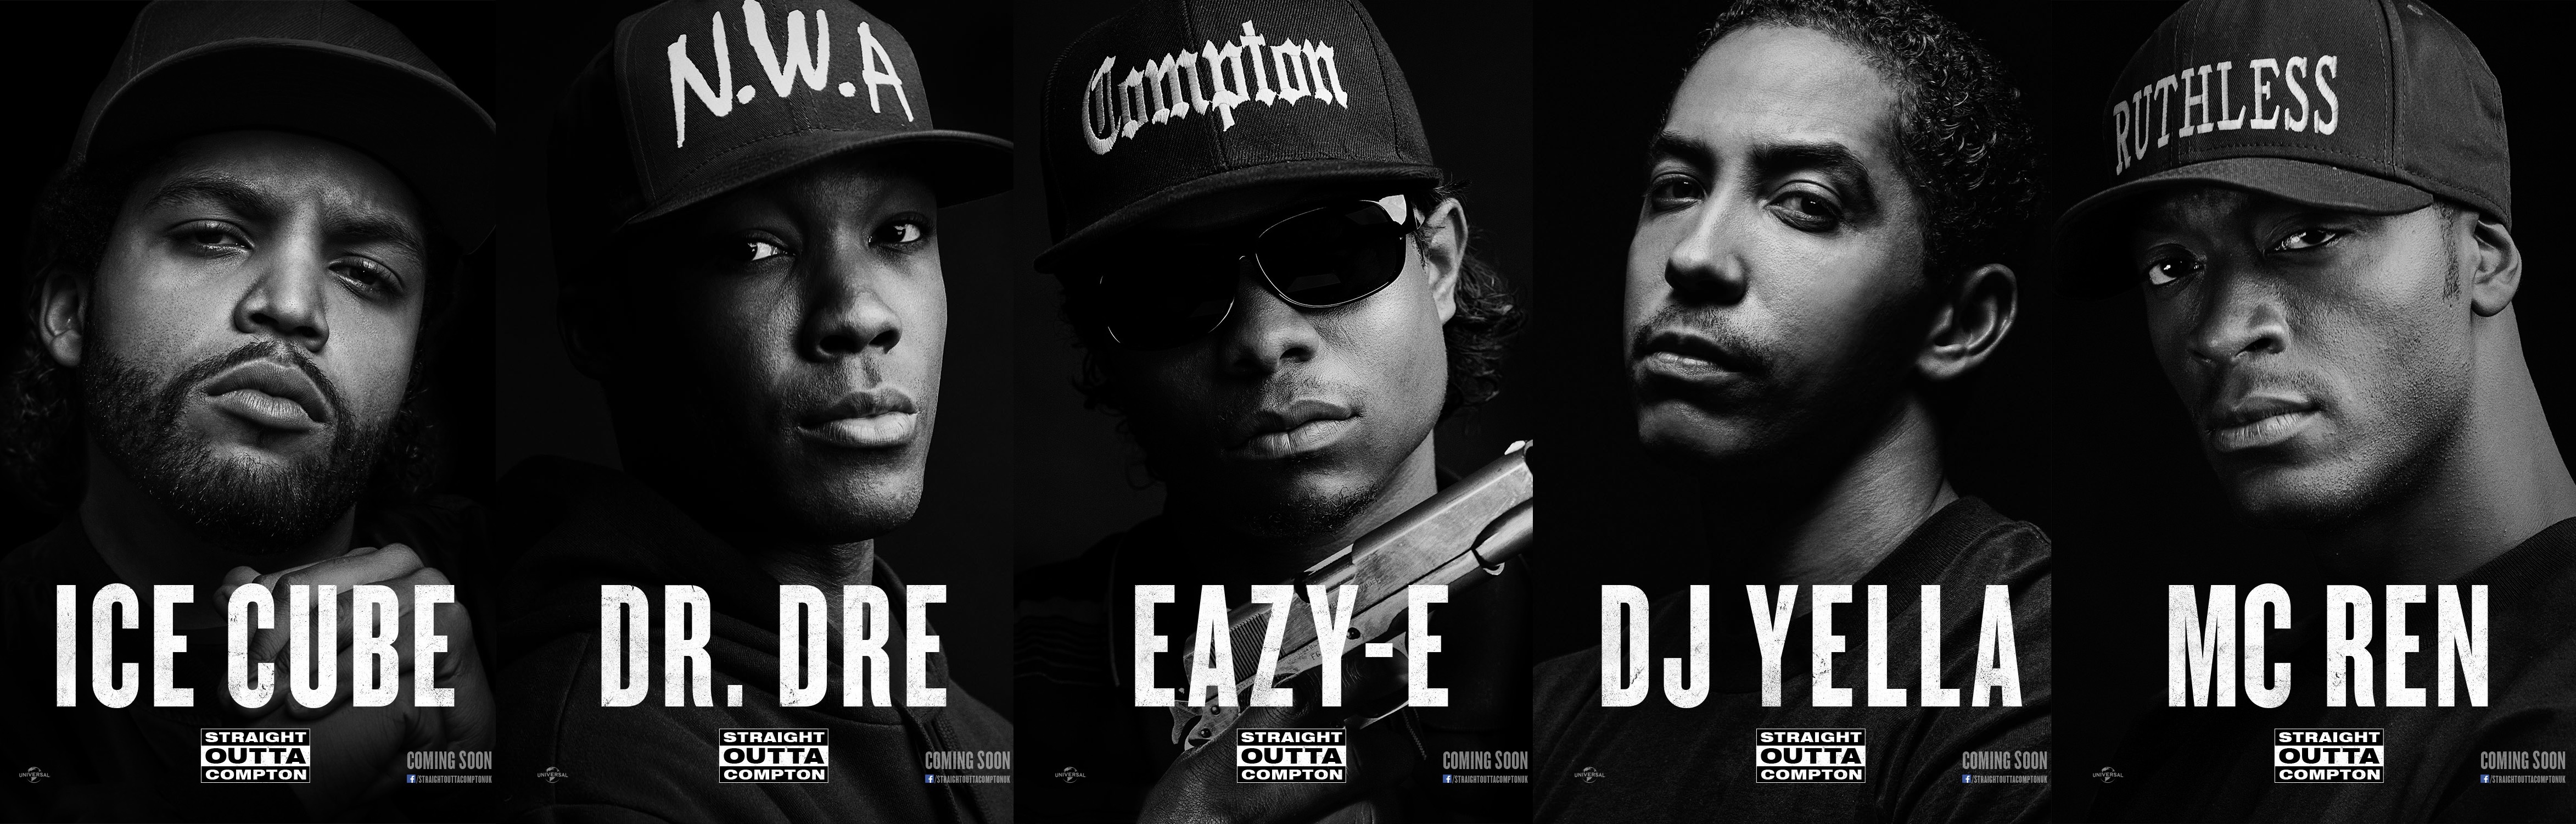 Embracing The History And Of Straight Outta Compton | Houston Style Magazine | Urban Weekly